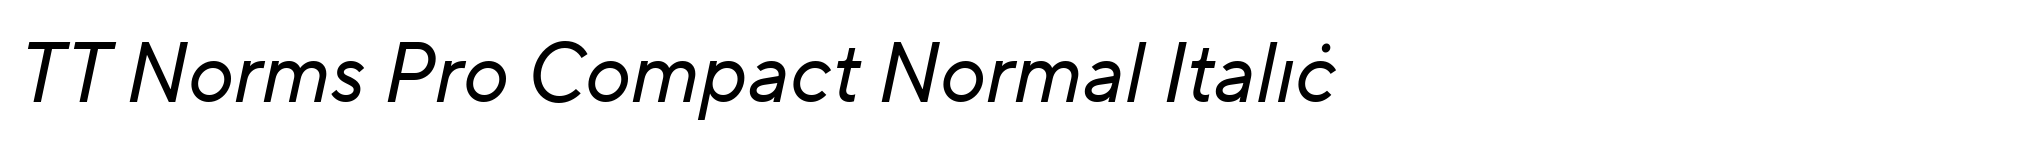 TT Norms Pro Compact Normal Italic image